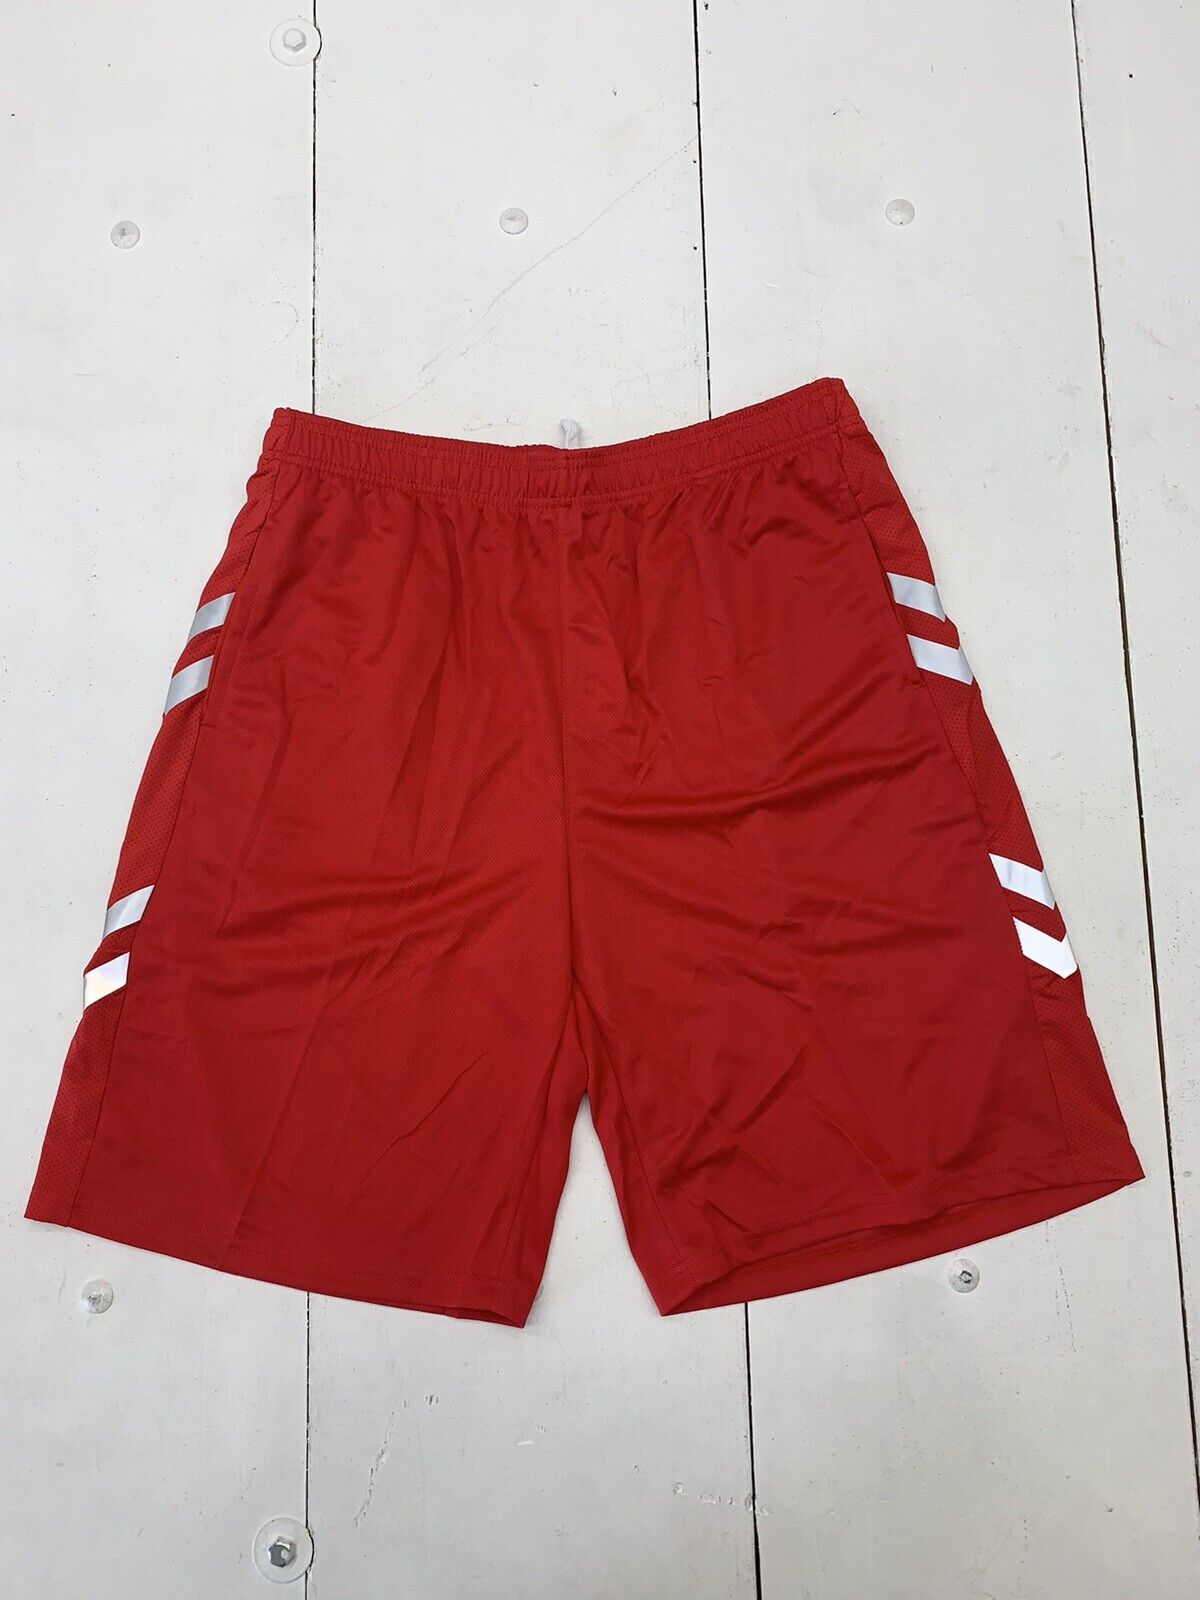 Liberty Pro Mens red Athletic Shorts Size XL